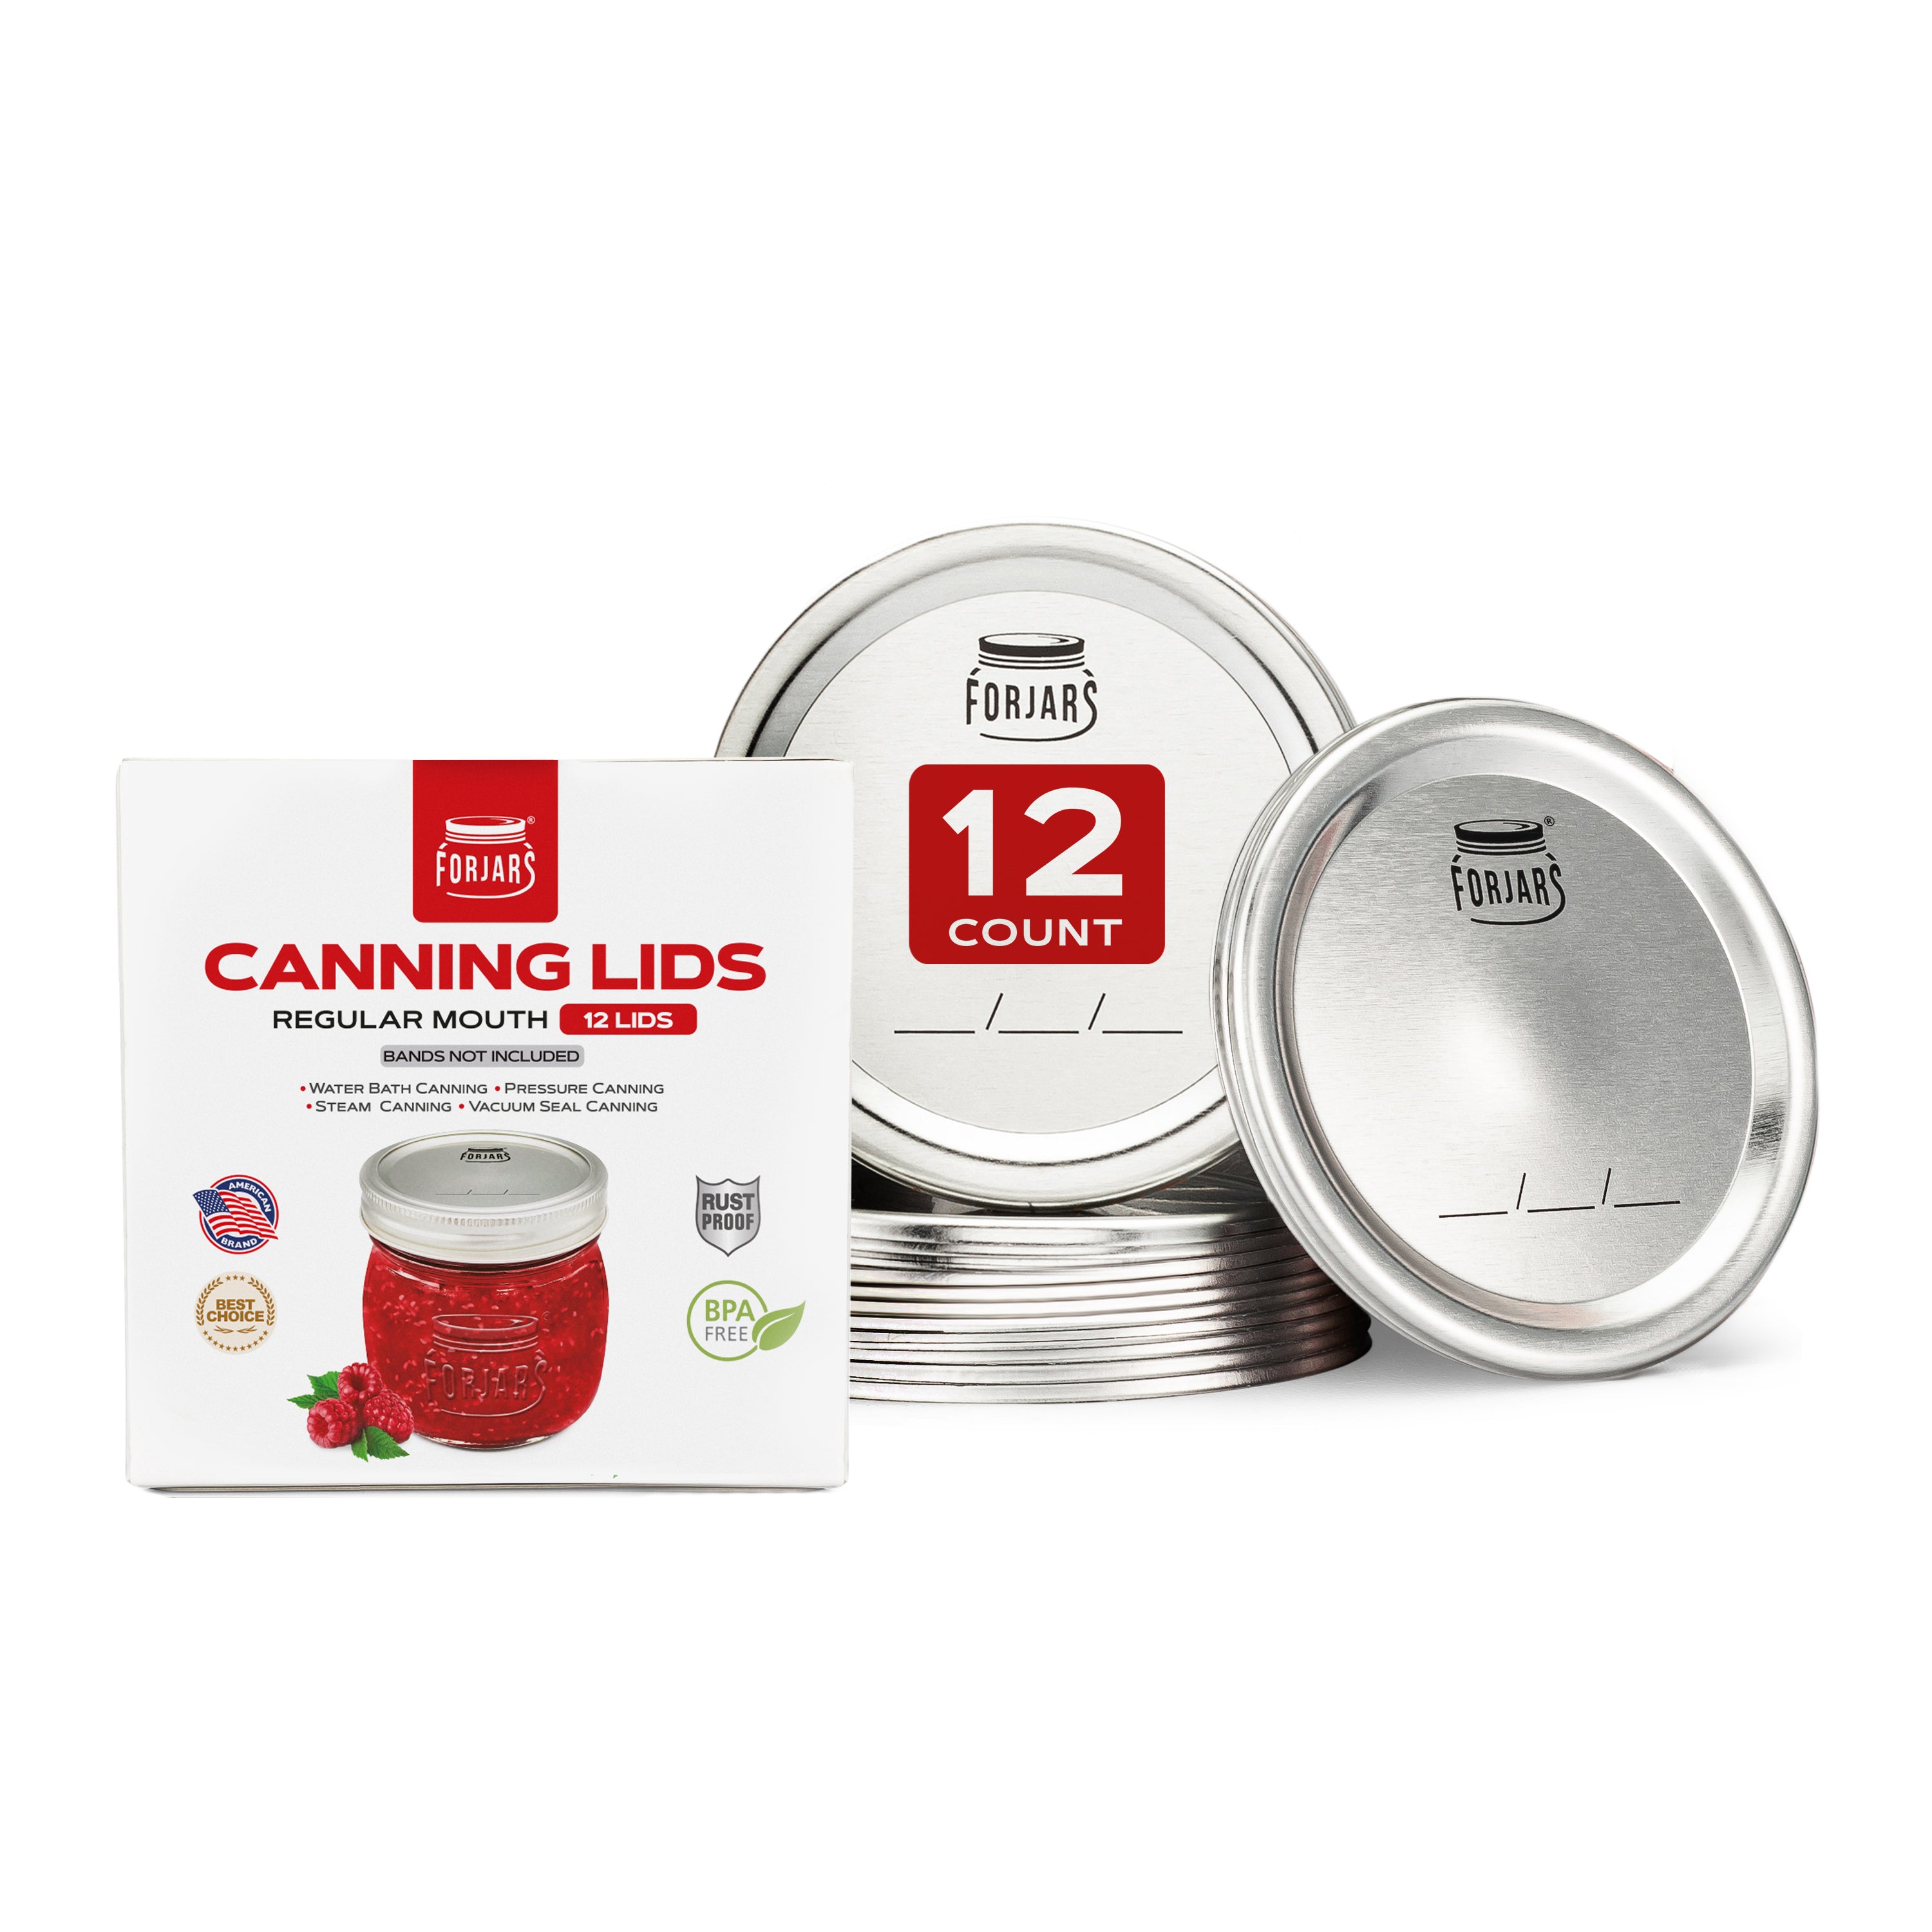 ForJars - 12Pack Regular Mouth Canning Lids